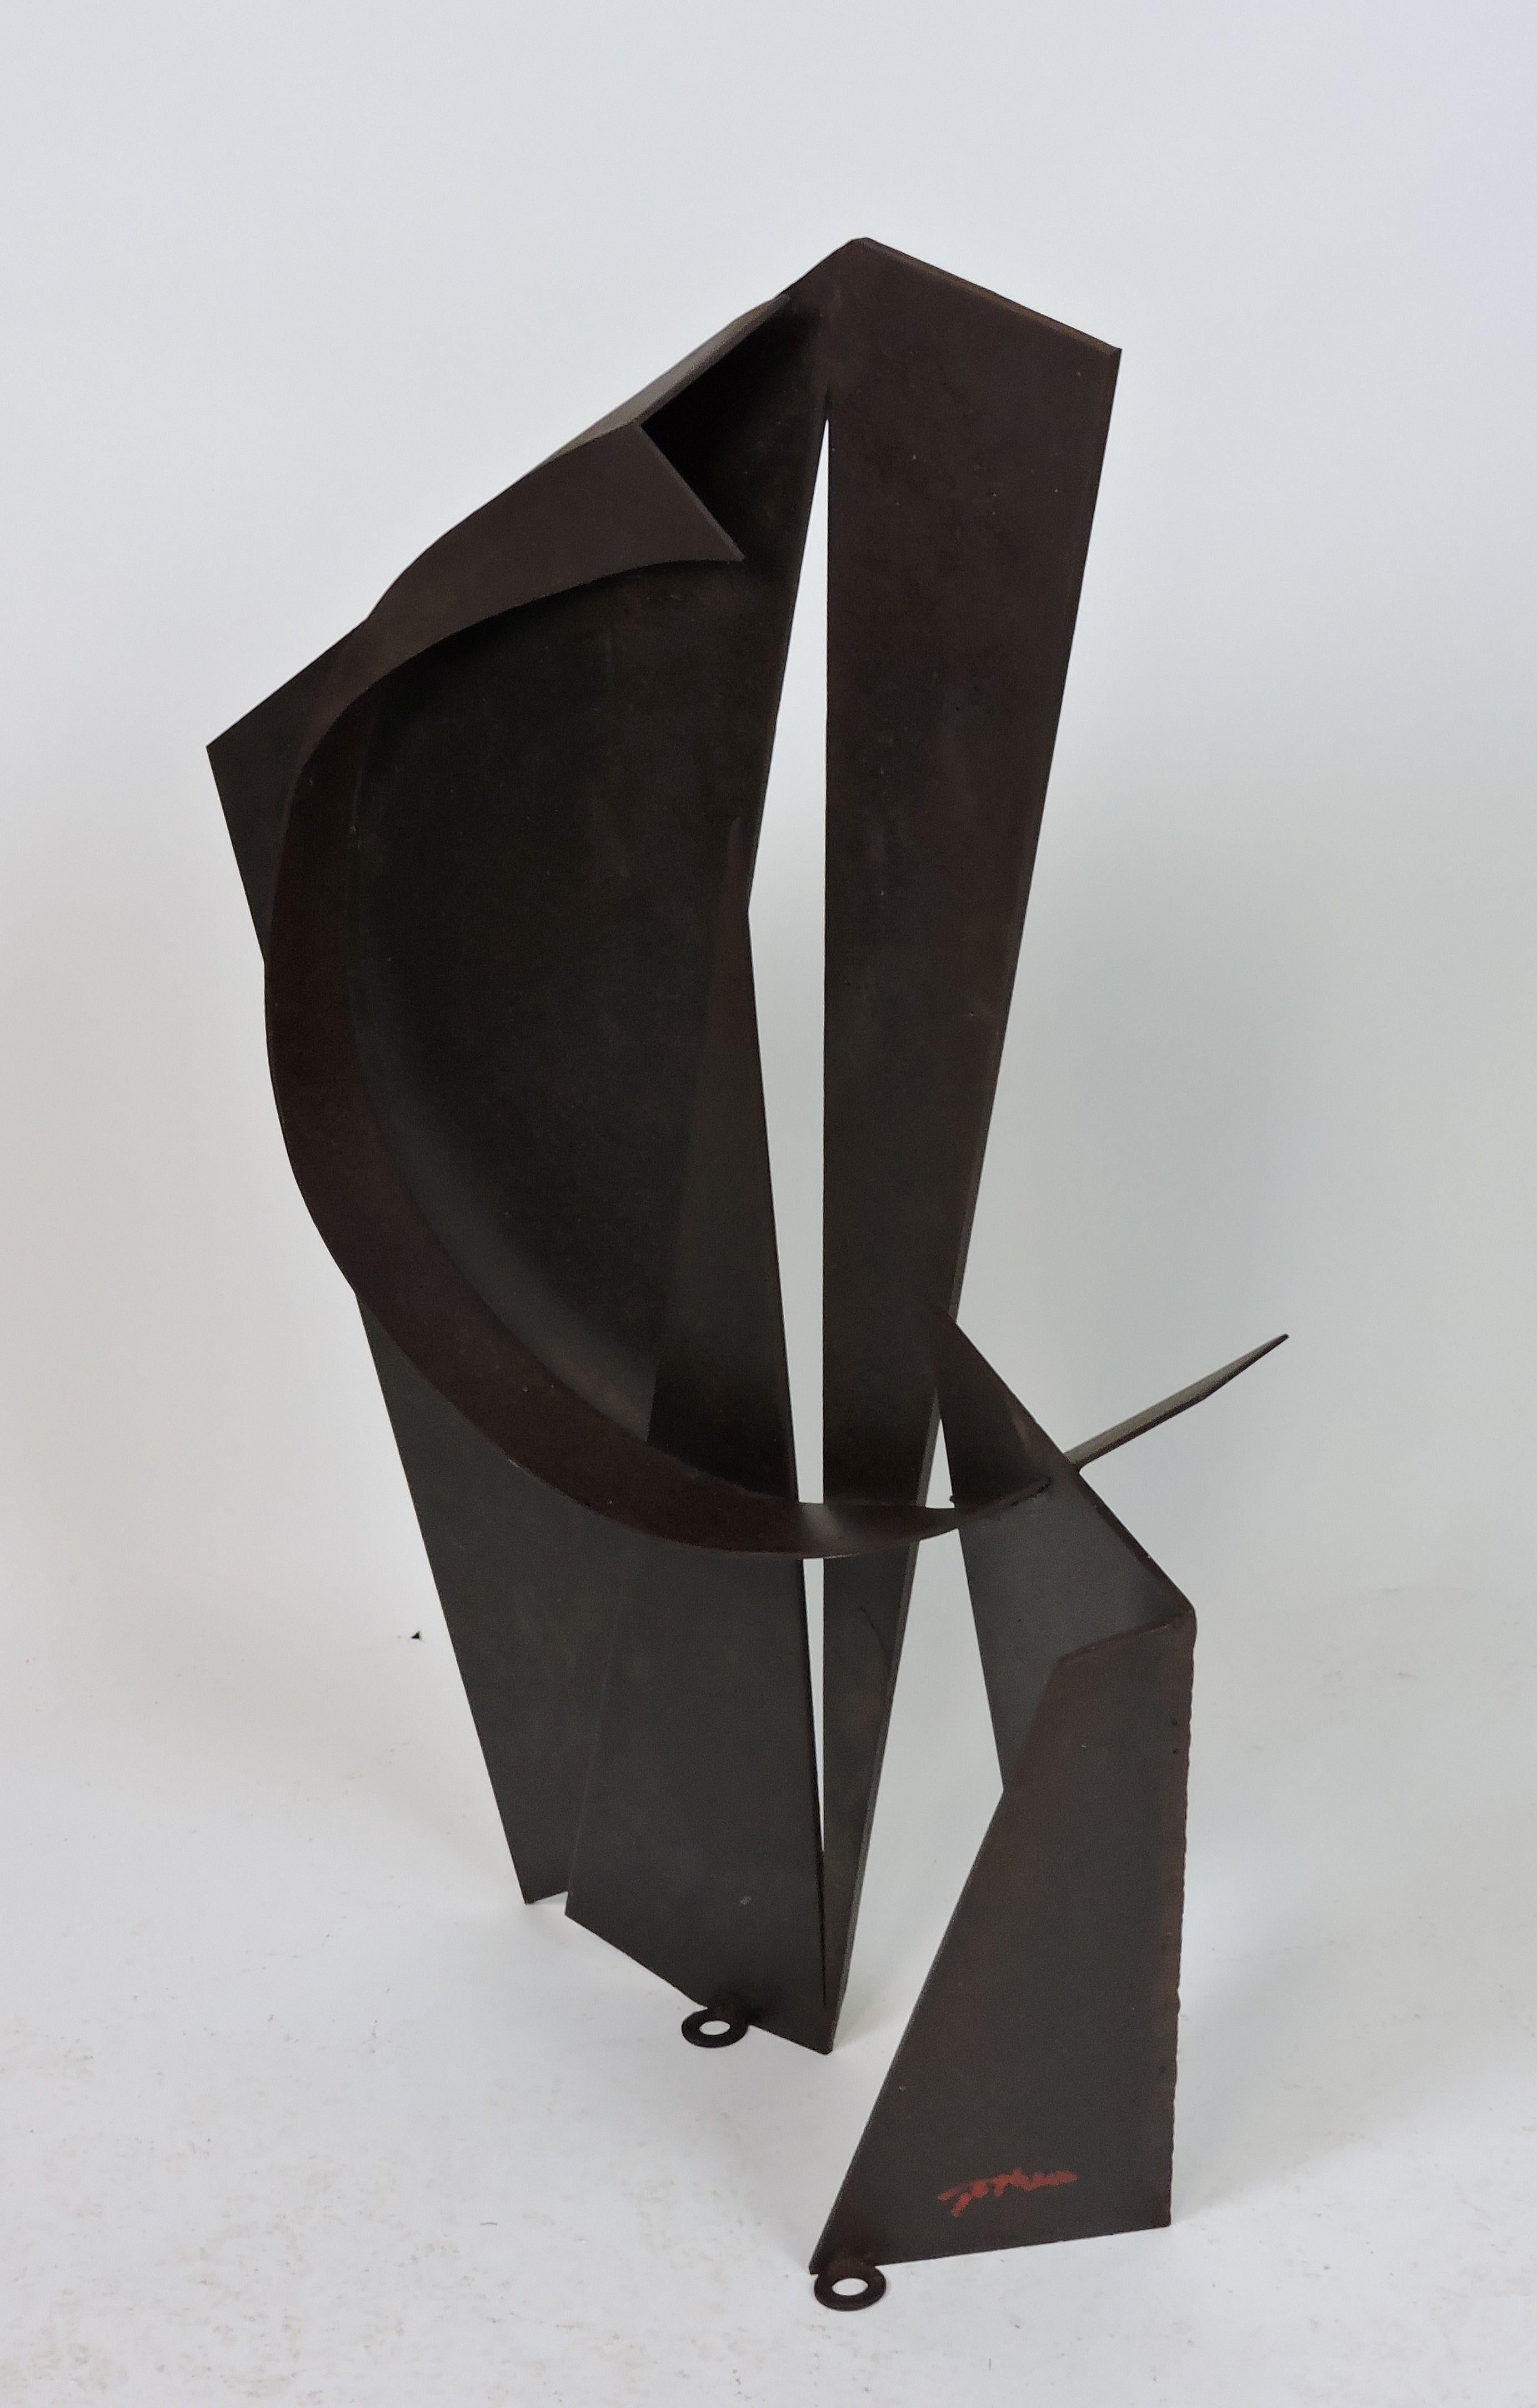 Large welded steel sculpture by Philadelphia based artist David Tothero. This sculpture has strong graphic imagery of curves and angles. The height is 37 inches and it's suitable for both indoor and outdoor display. Signed with the artists signature